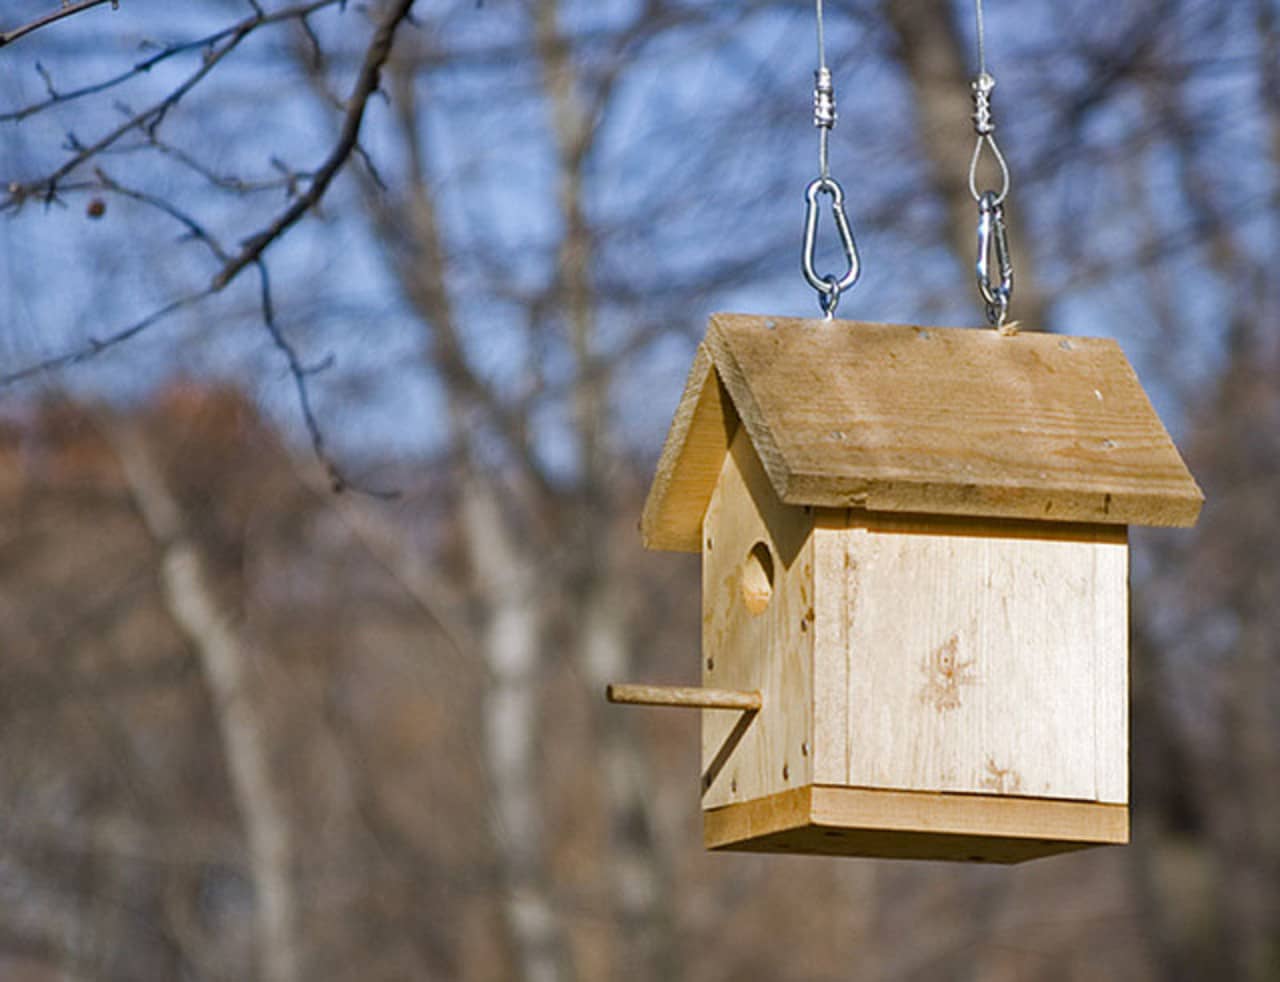 Build a birdhouse at the Demarest Train Station.